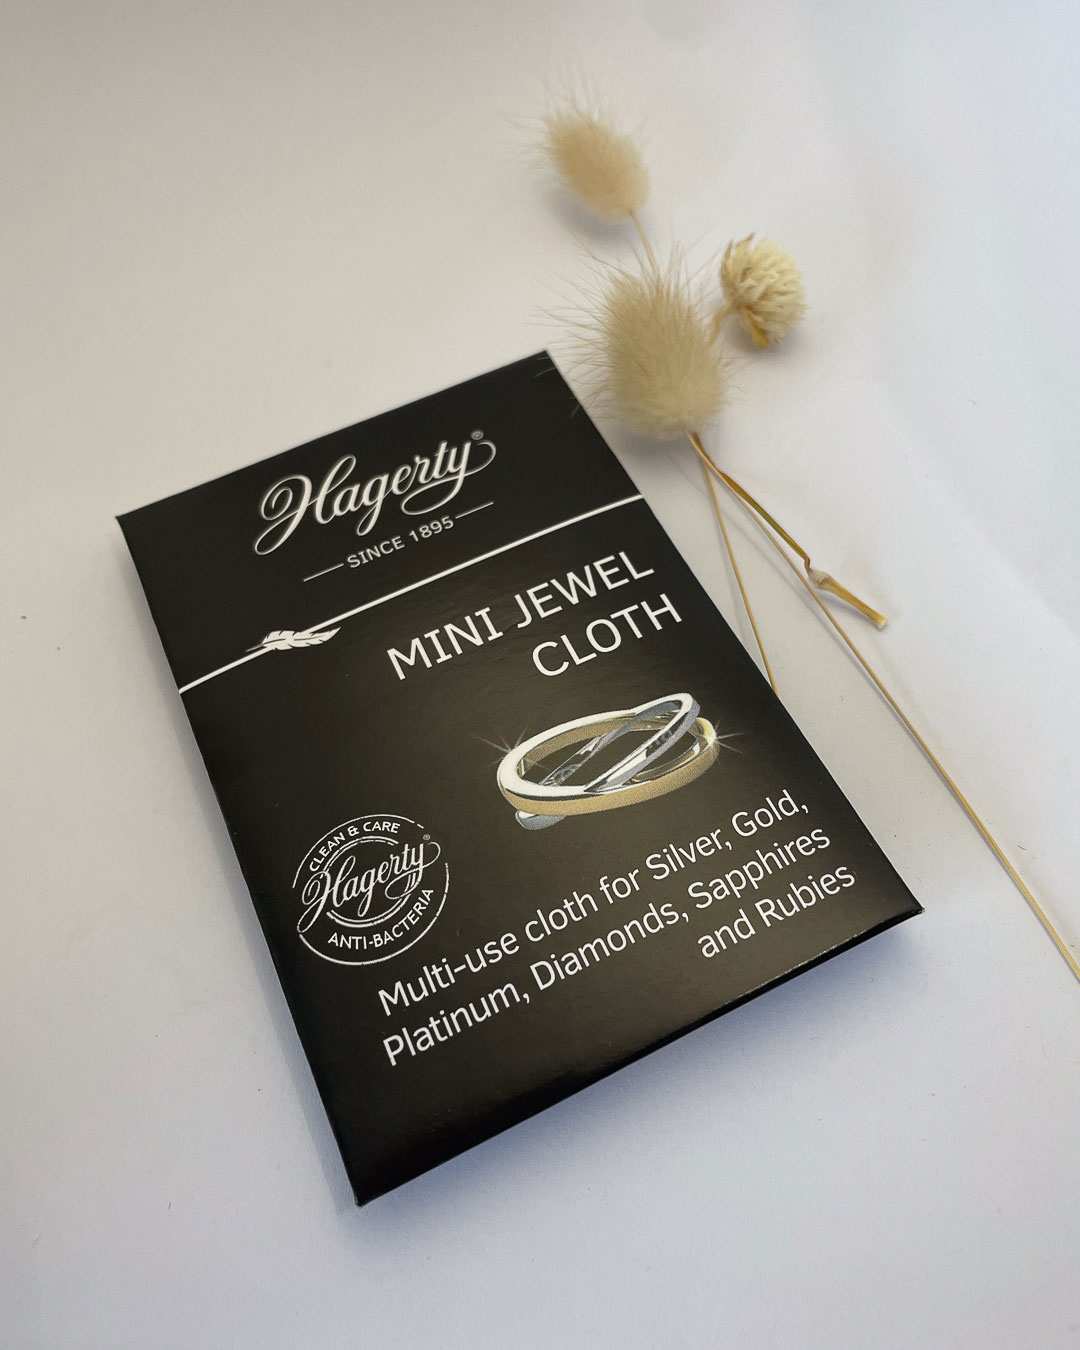 An image showin the front of the packet that contains the Hagerty jewellery polishing cloth. 